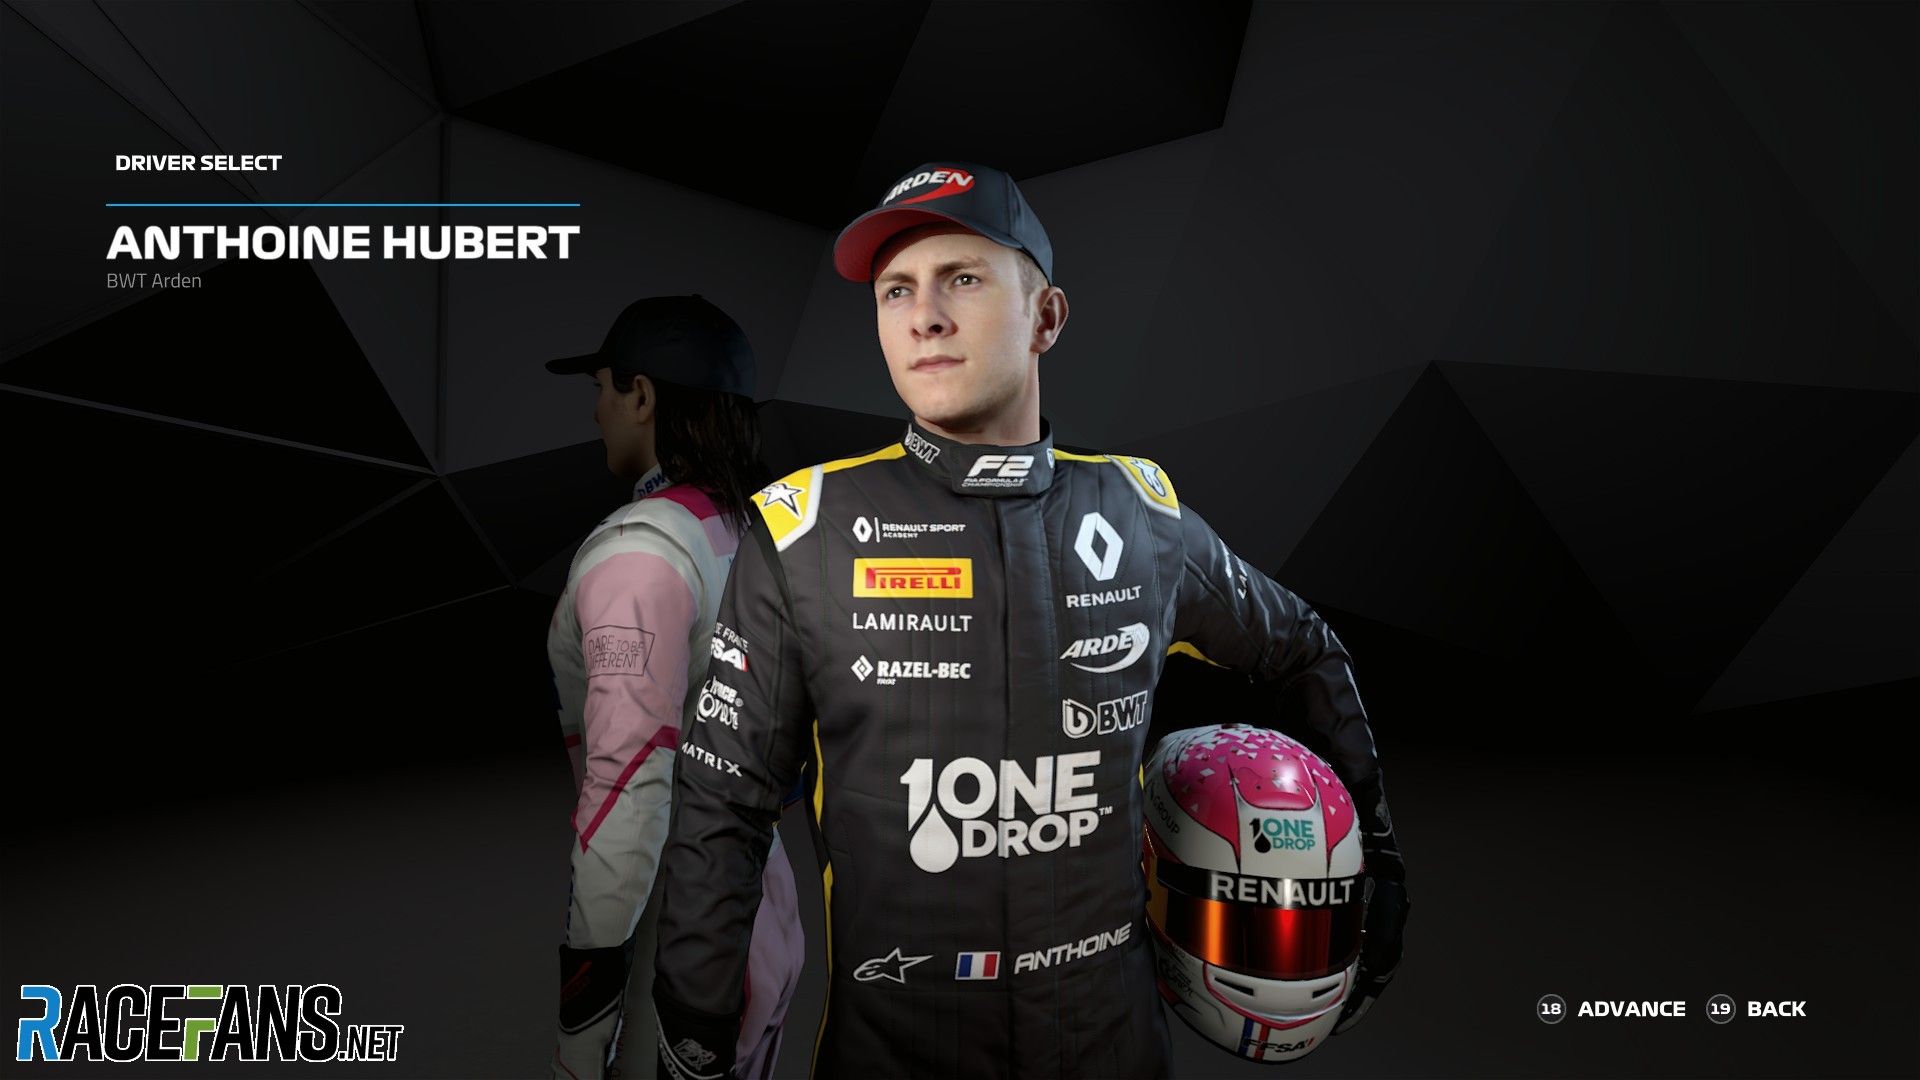 F1 2020: Players can add Anthoine Hubert to 2020 F1 grid · RaceFans